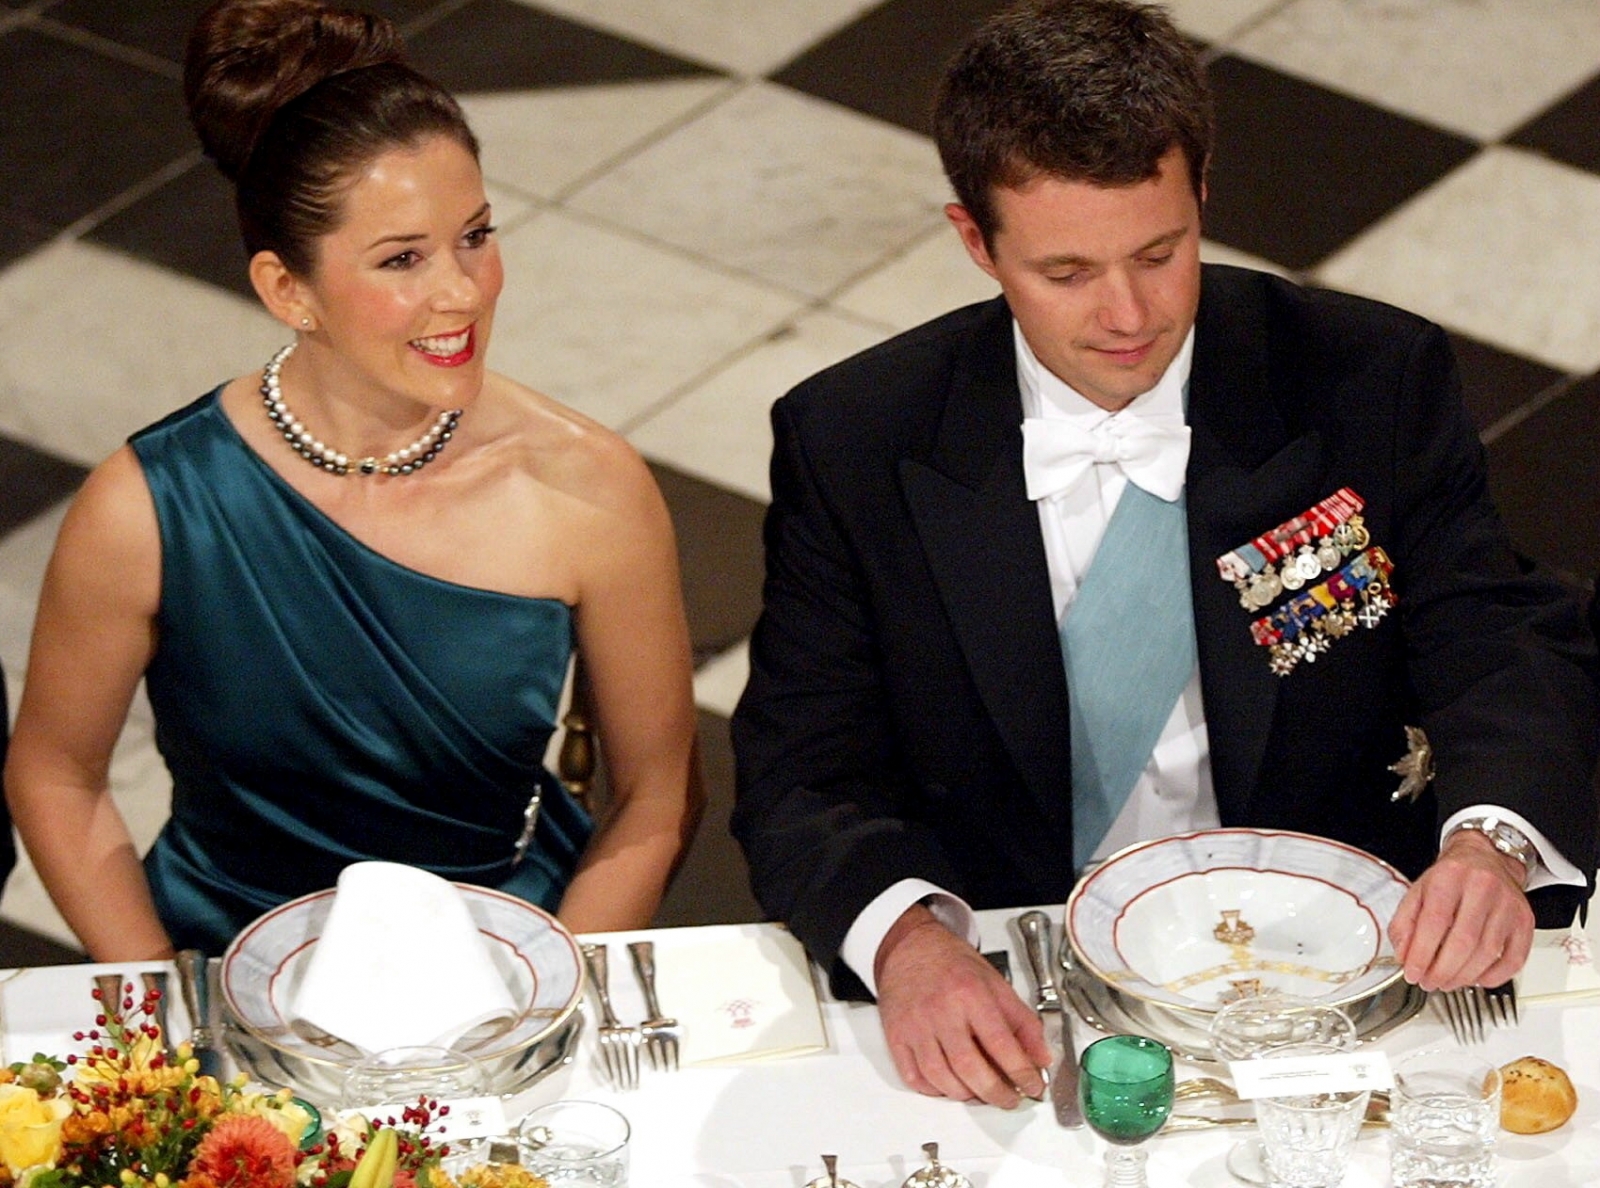 2003-10-08+engagement+state+dinner.+Necklace+gift+from+prince+Henrik.jpg